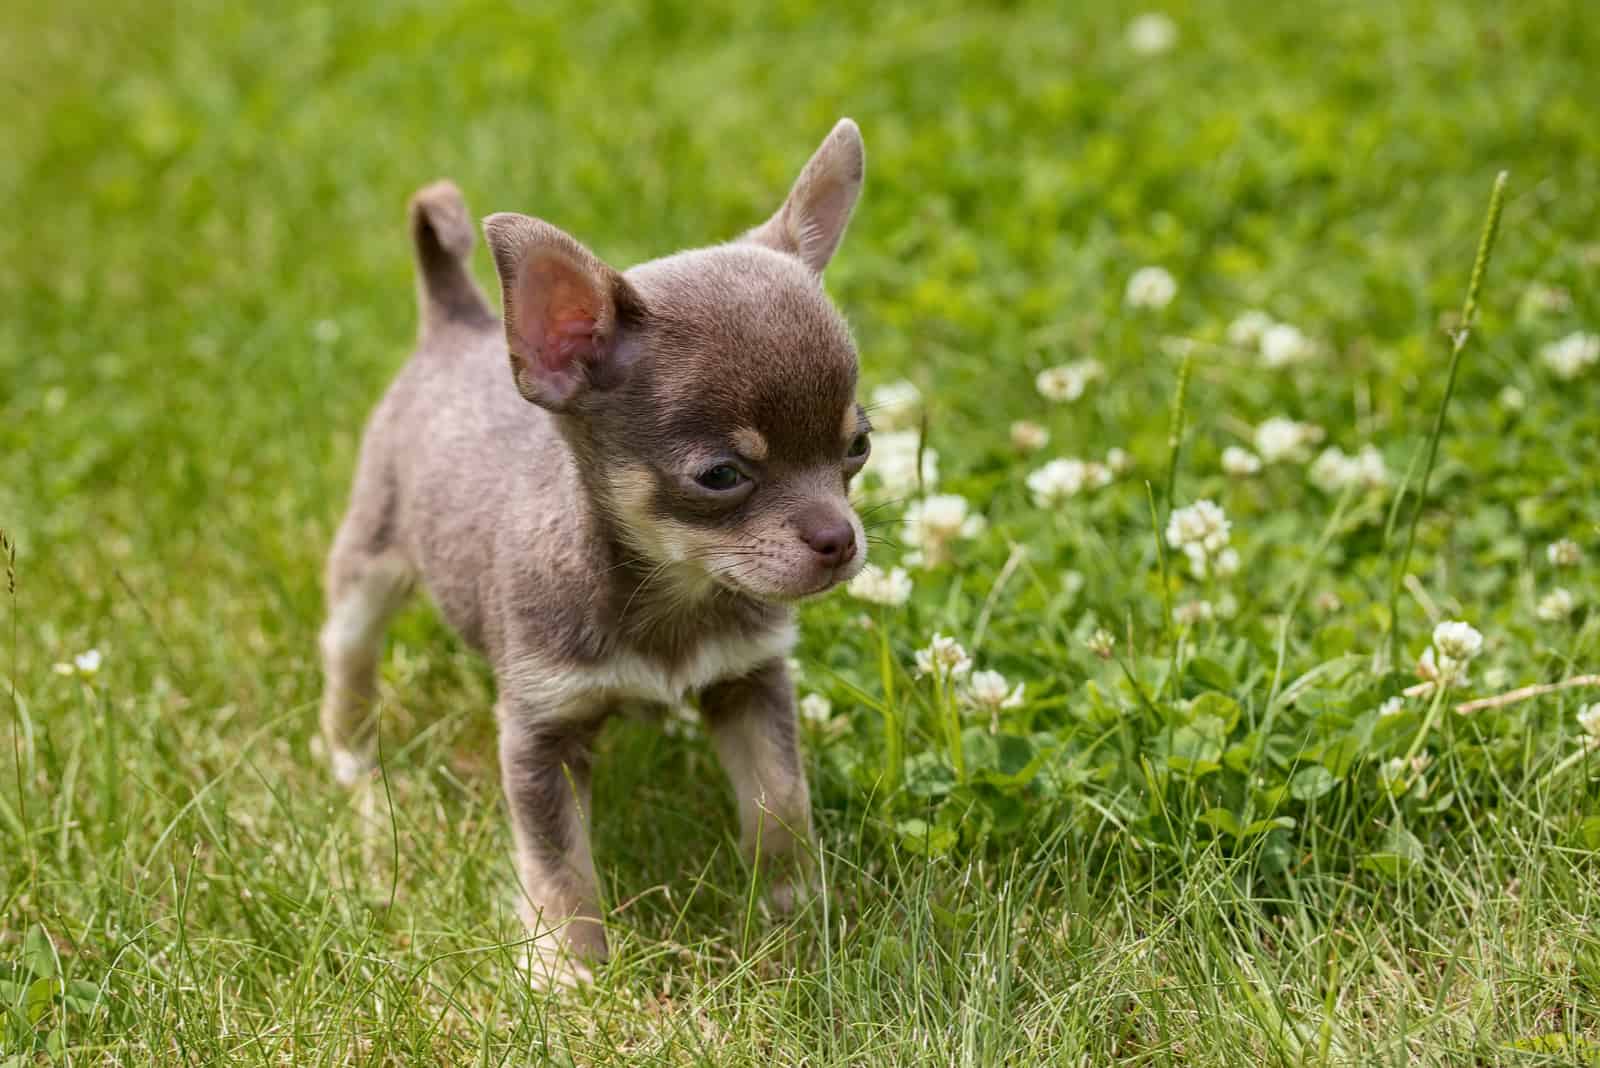 Chihuahua puppy standing on grass